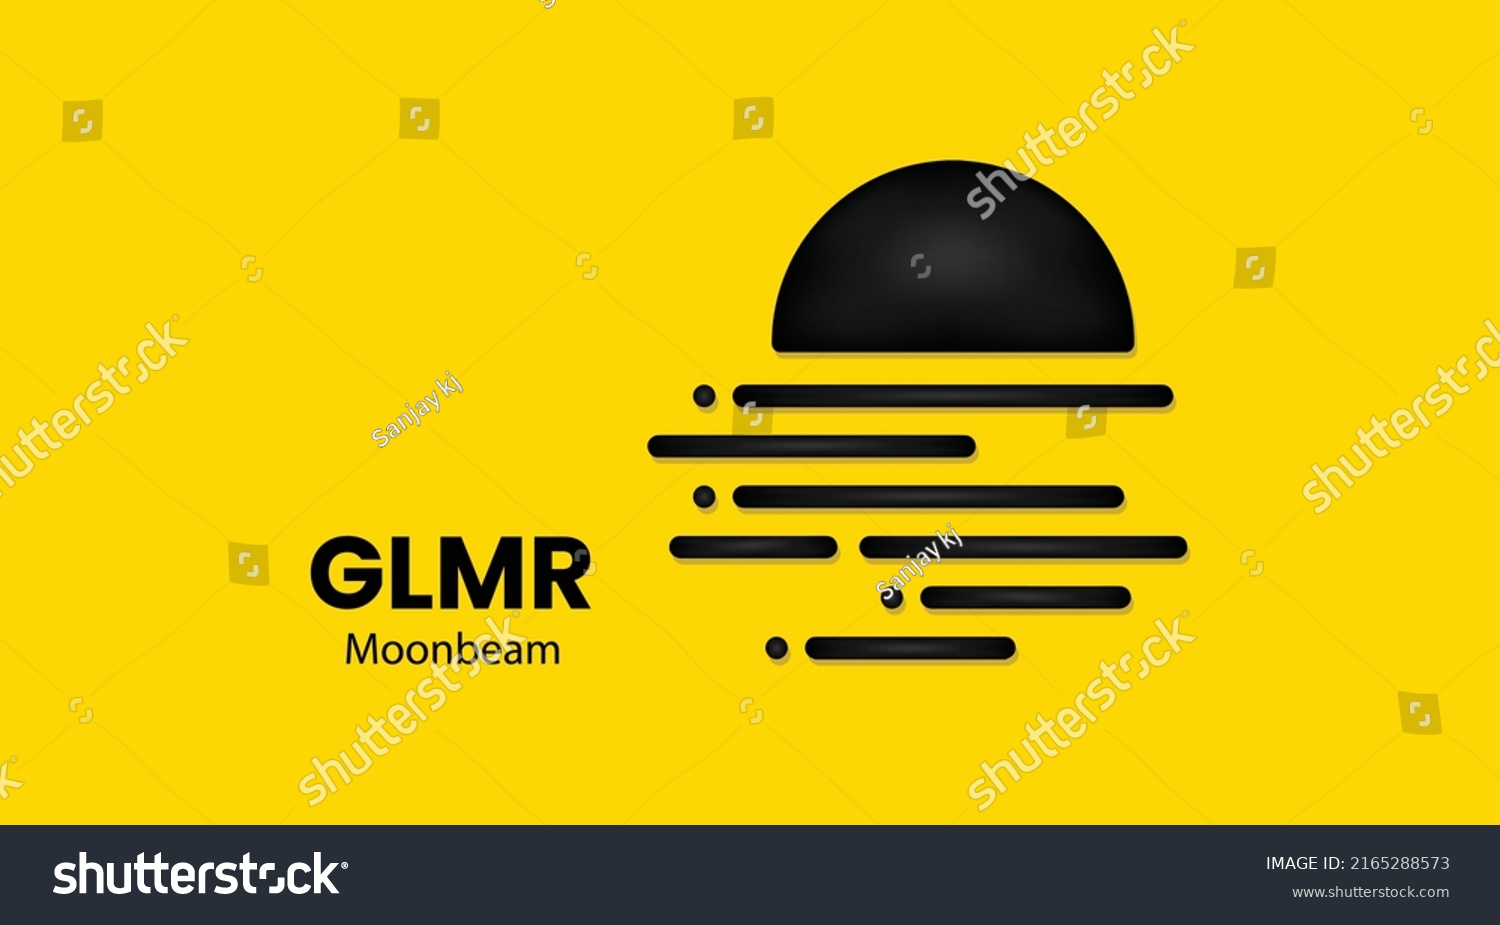 SVG of GLMR coin cryptocurrency 3d logo isolated on yellow background with copy space. vector illustration of Moonbeam coin banner design concept. svg